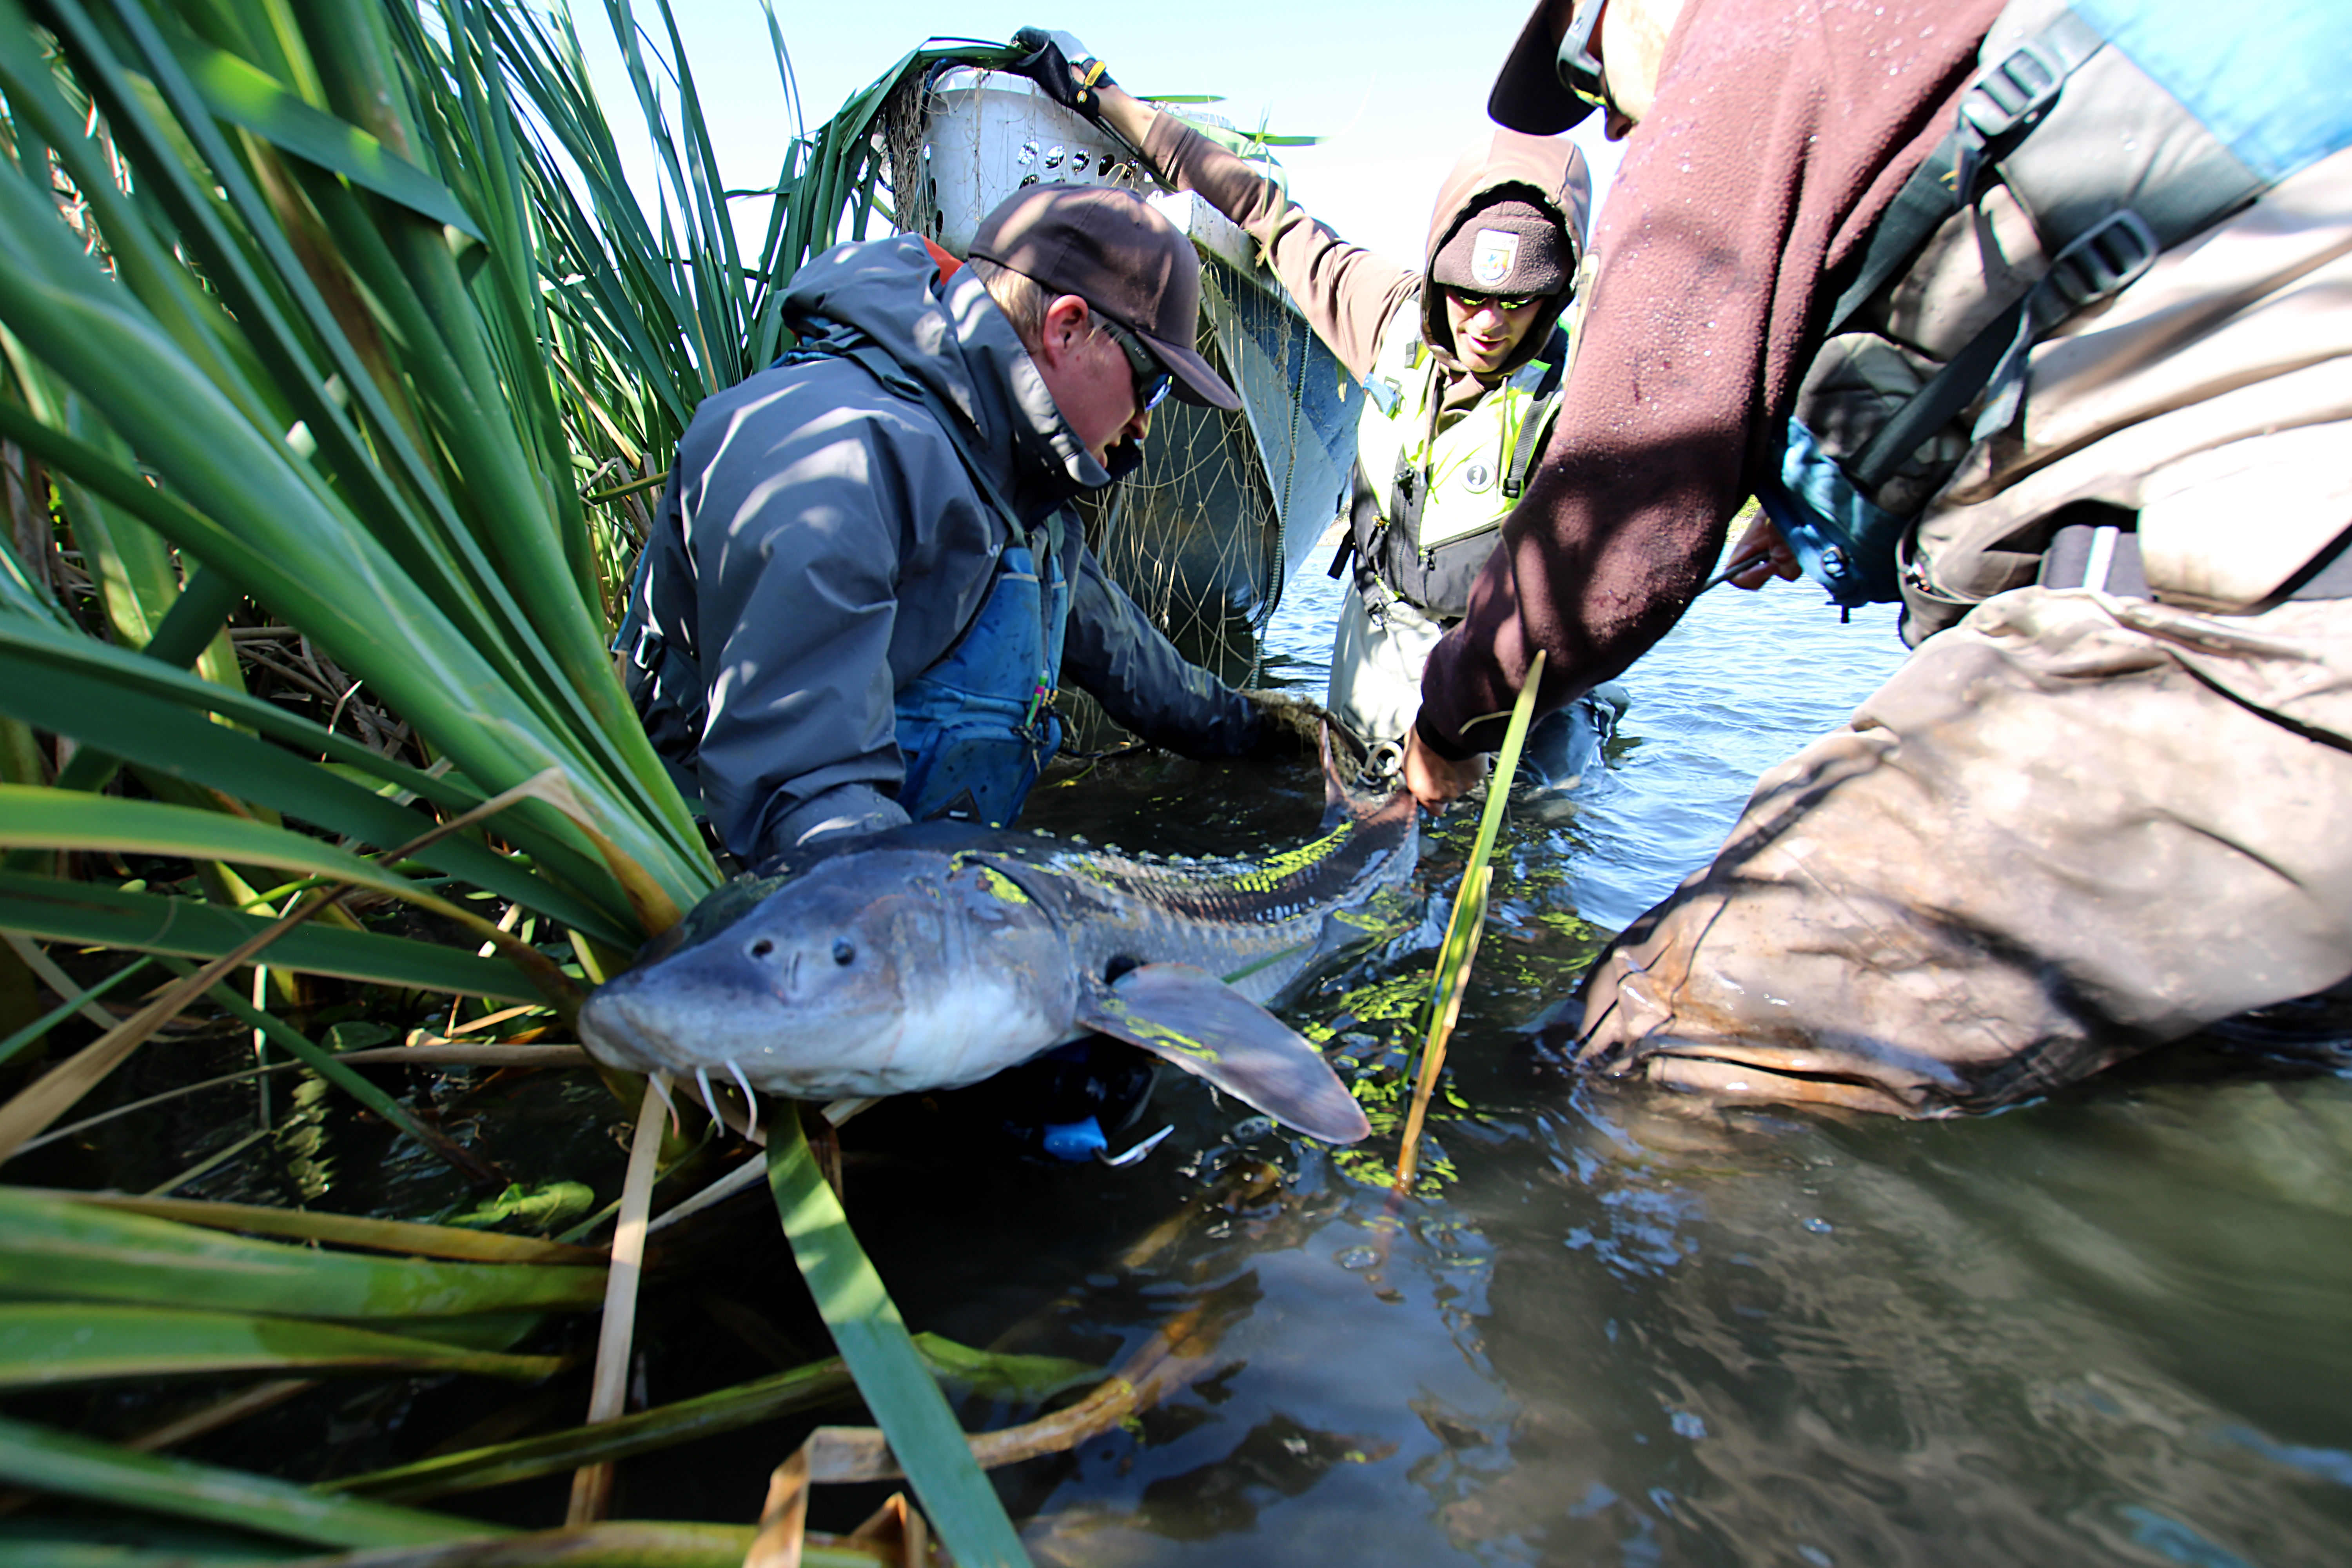 Three men hold a long, shiny, gray fish in the water near the edge of a river. 